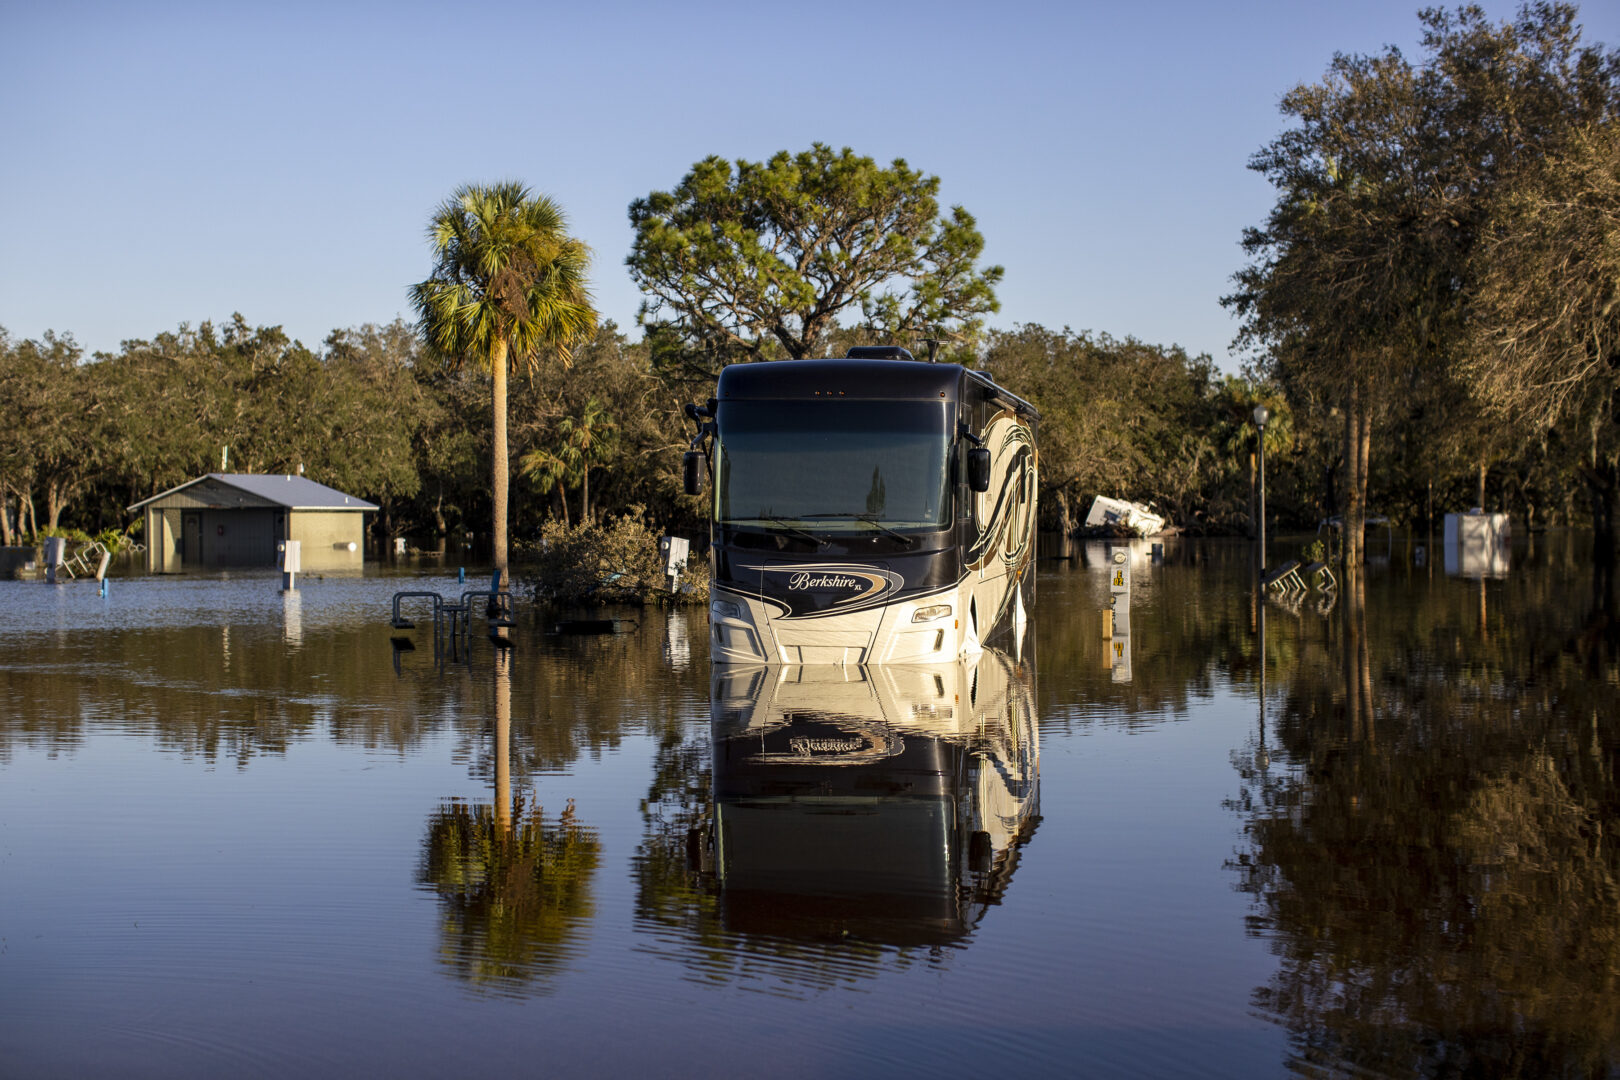 The Peace River RV & Camping Resort in Wauchula Florida on October 1, 2022. The area sits beside the Peace River which overflowed and flooded parts of the area. 
Carlos Osorio for NPR